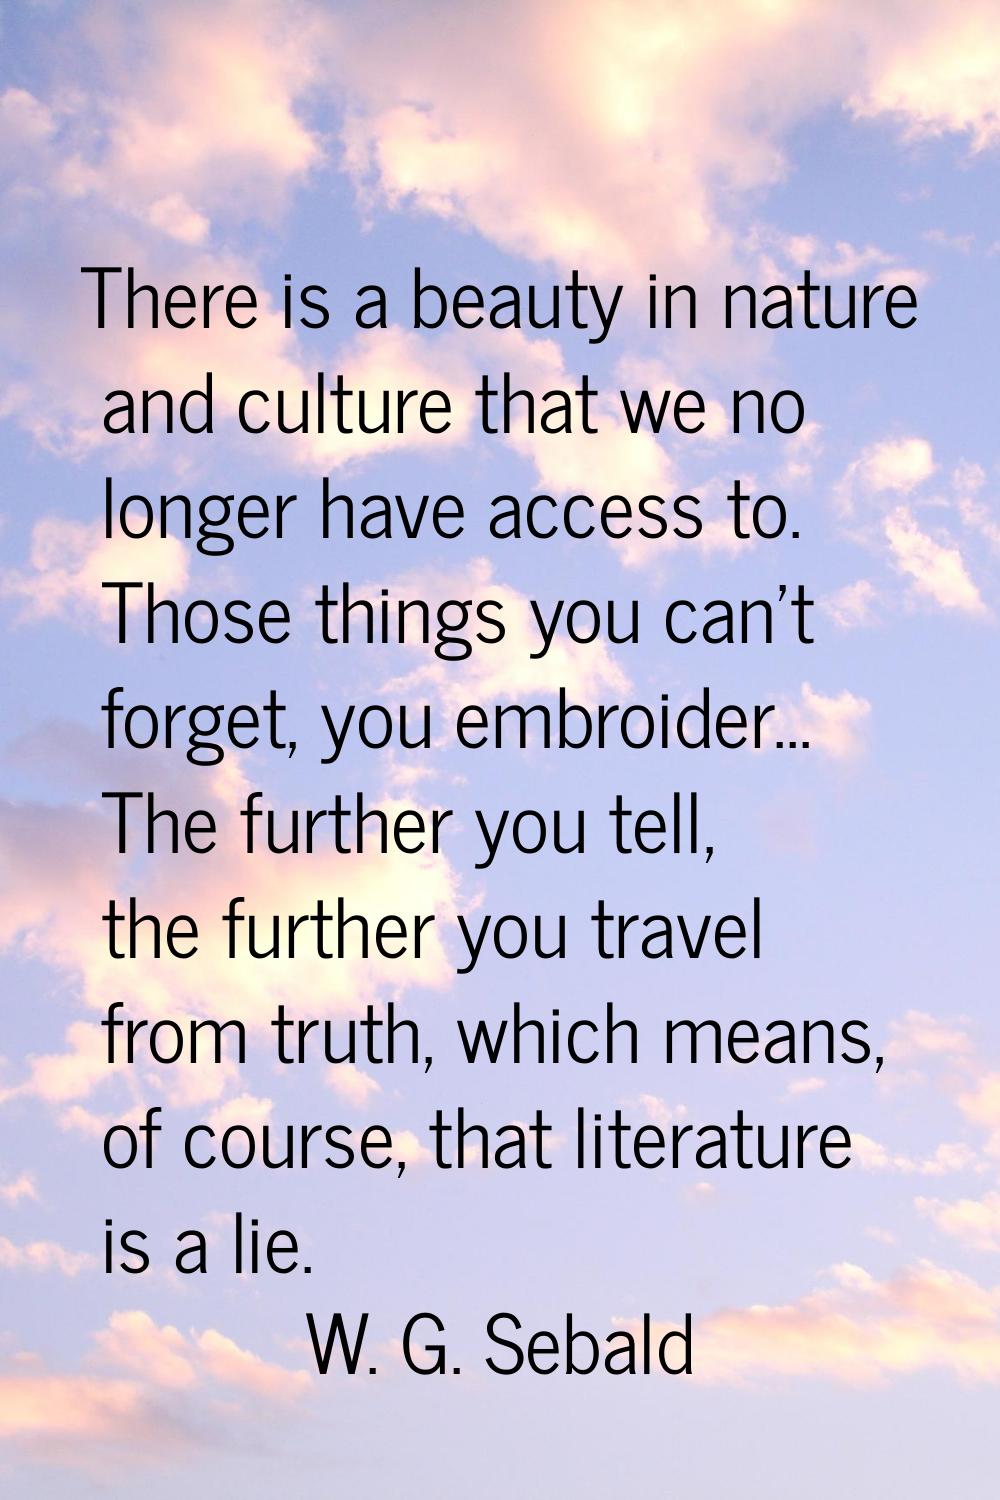 There is a beauty in nature and culture that we no longer have access to. Those things you can't fo